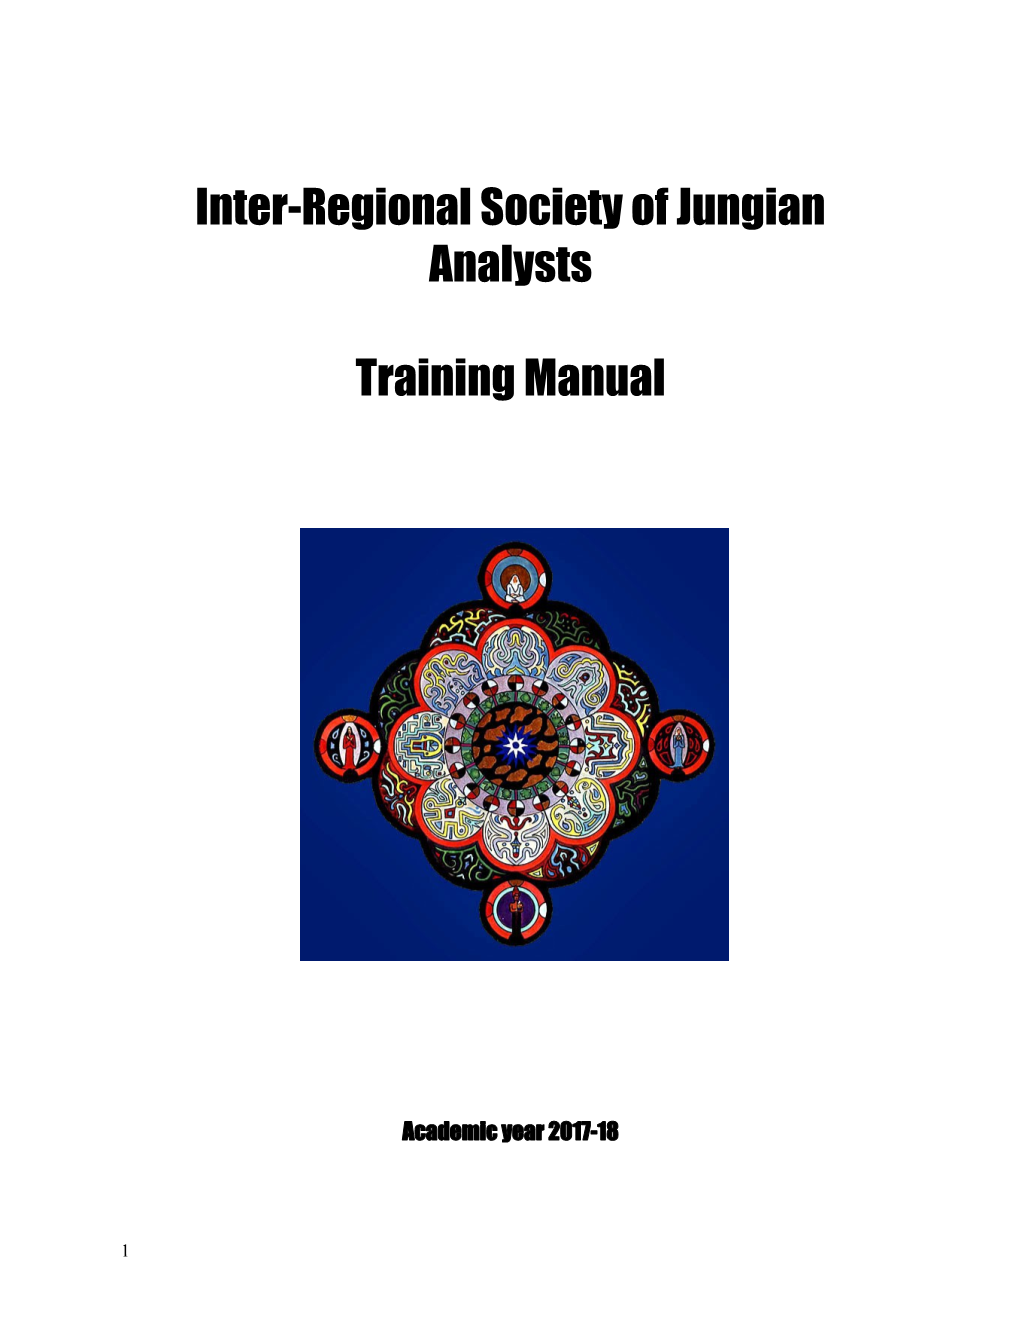 Inter-Regional Society of Jungian Analysts